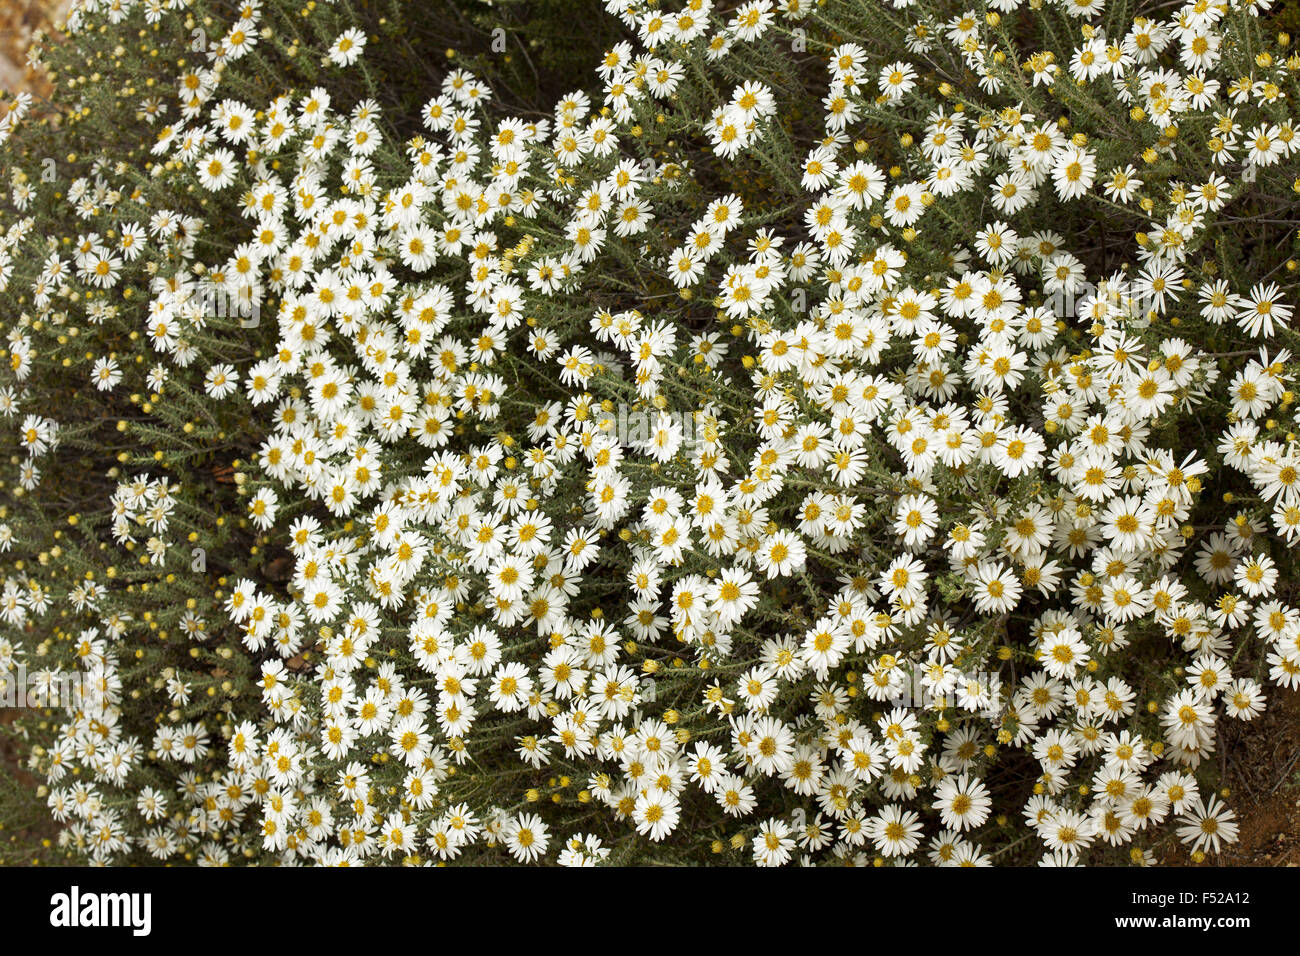 Mass of wildflowers, white daisies of Olearia pimeleoides, mallee daisy bush in outback South Australia Stock Photo